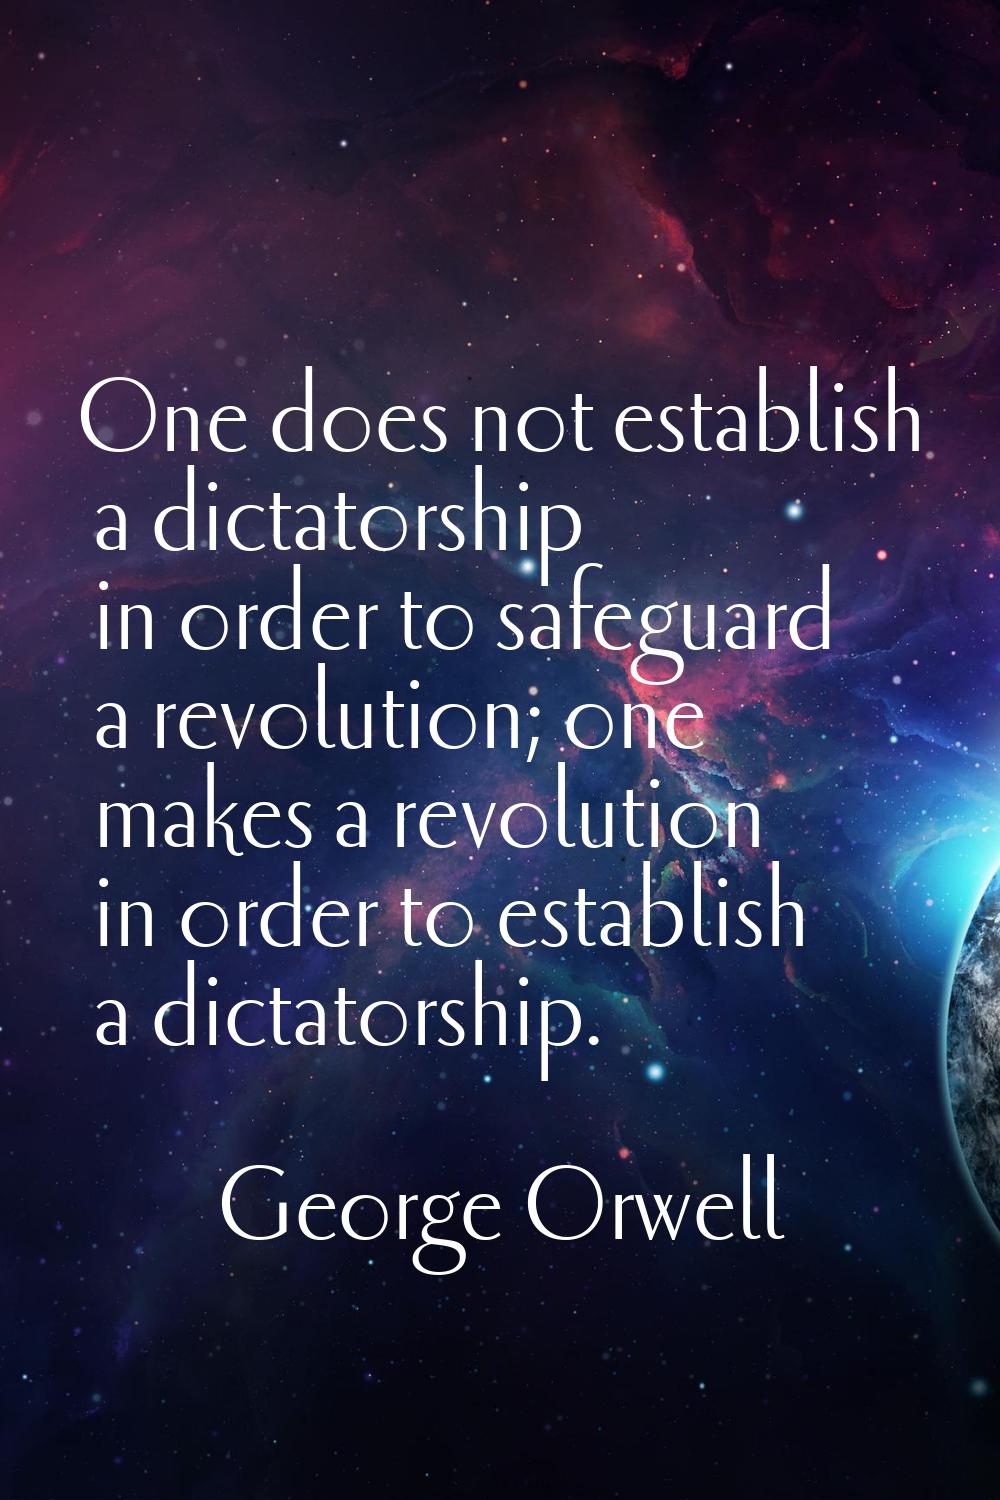 One does not establish a dictatorship in order to safeguard a revolution; one makes a revolution in